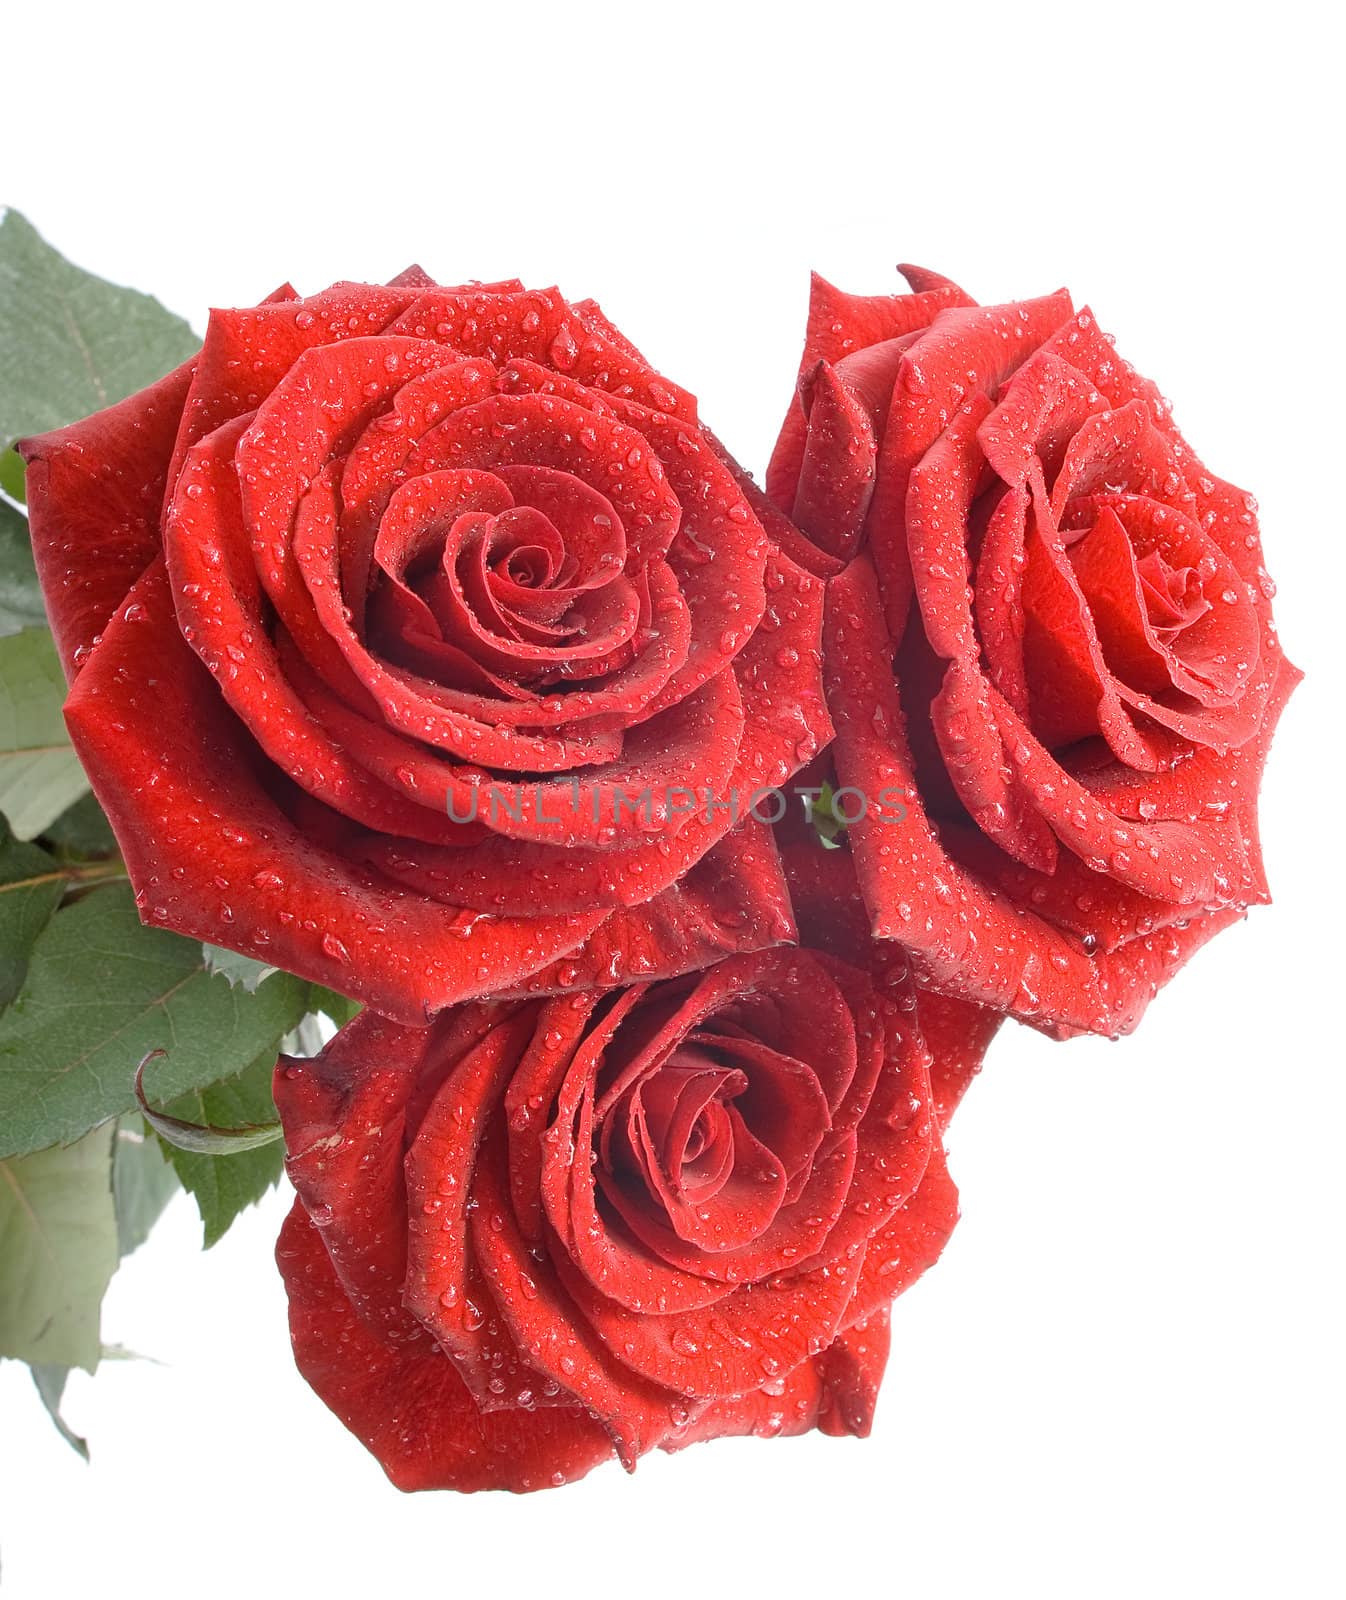 Three red roses on the white background by BIG_TAU